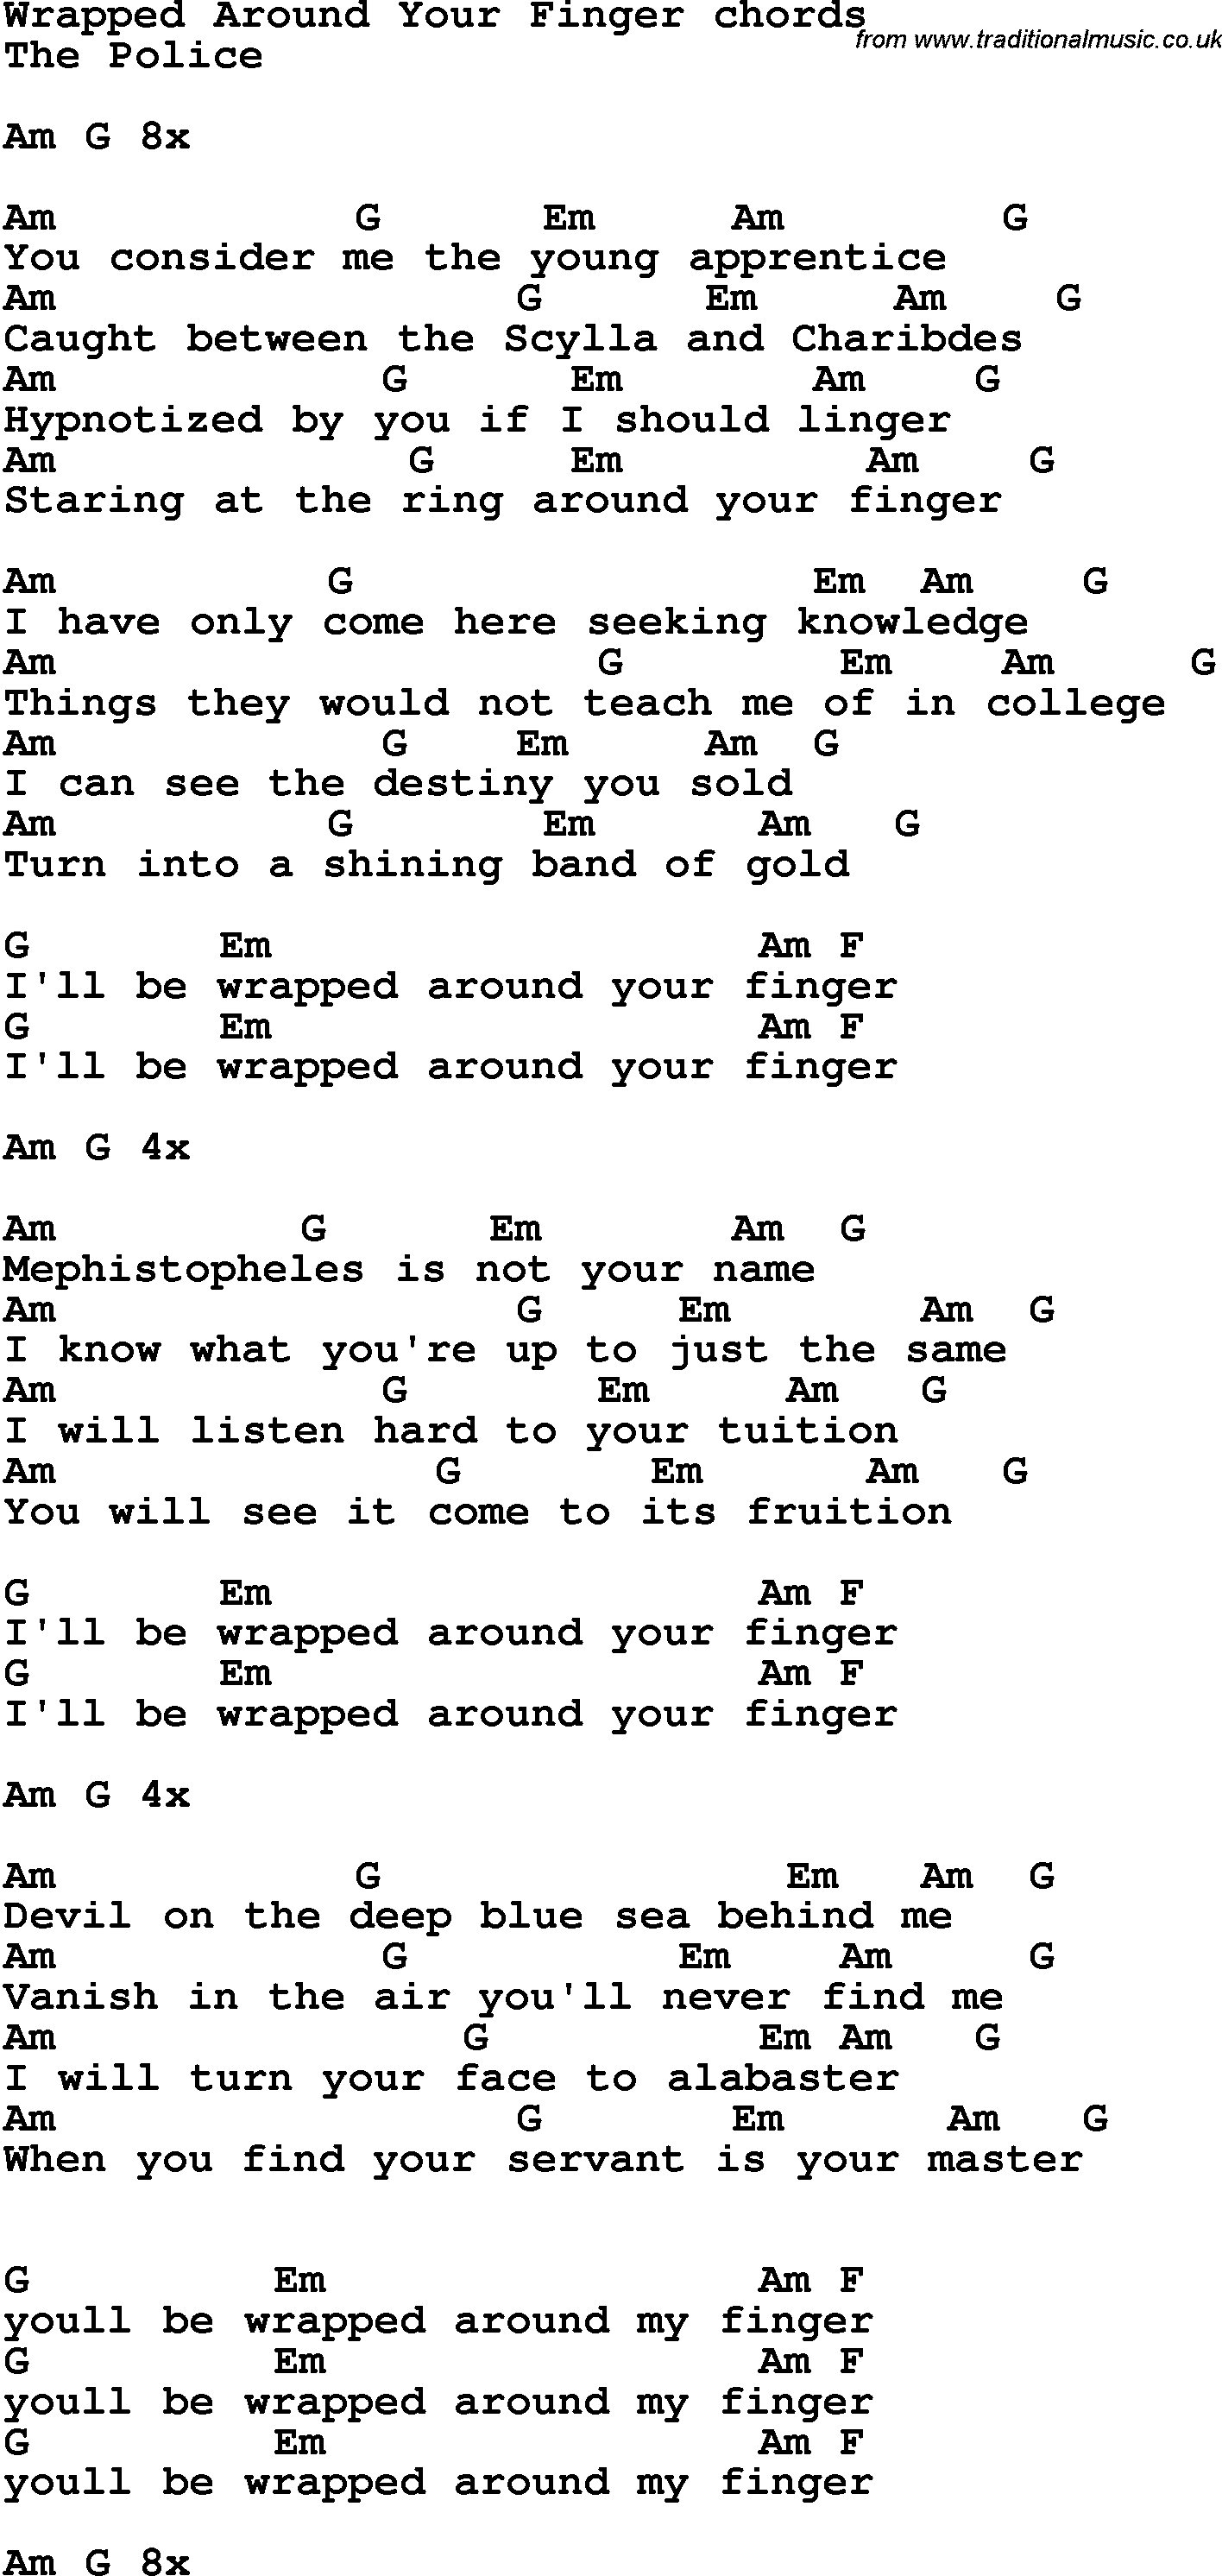 Song Lyrics with guitar chords for Wrapped Around Your Finger